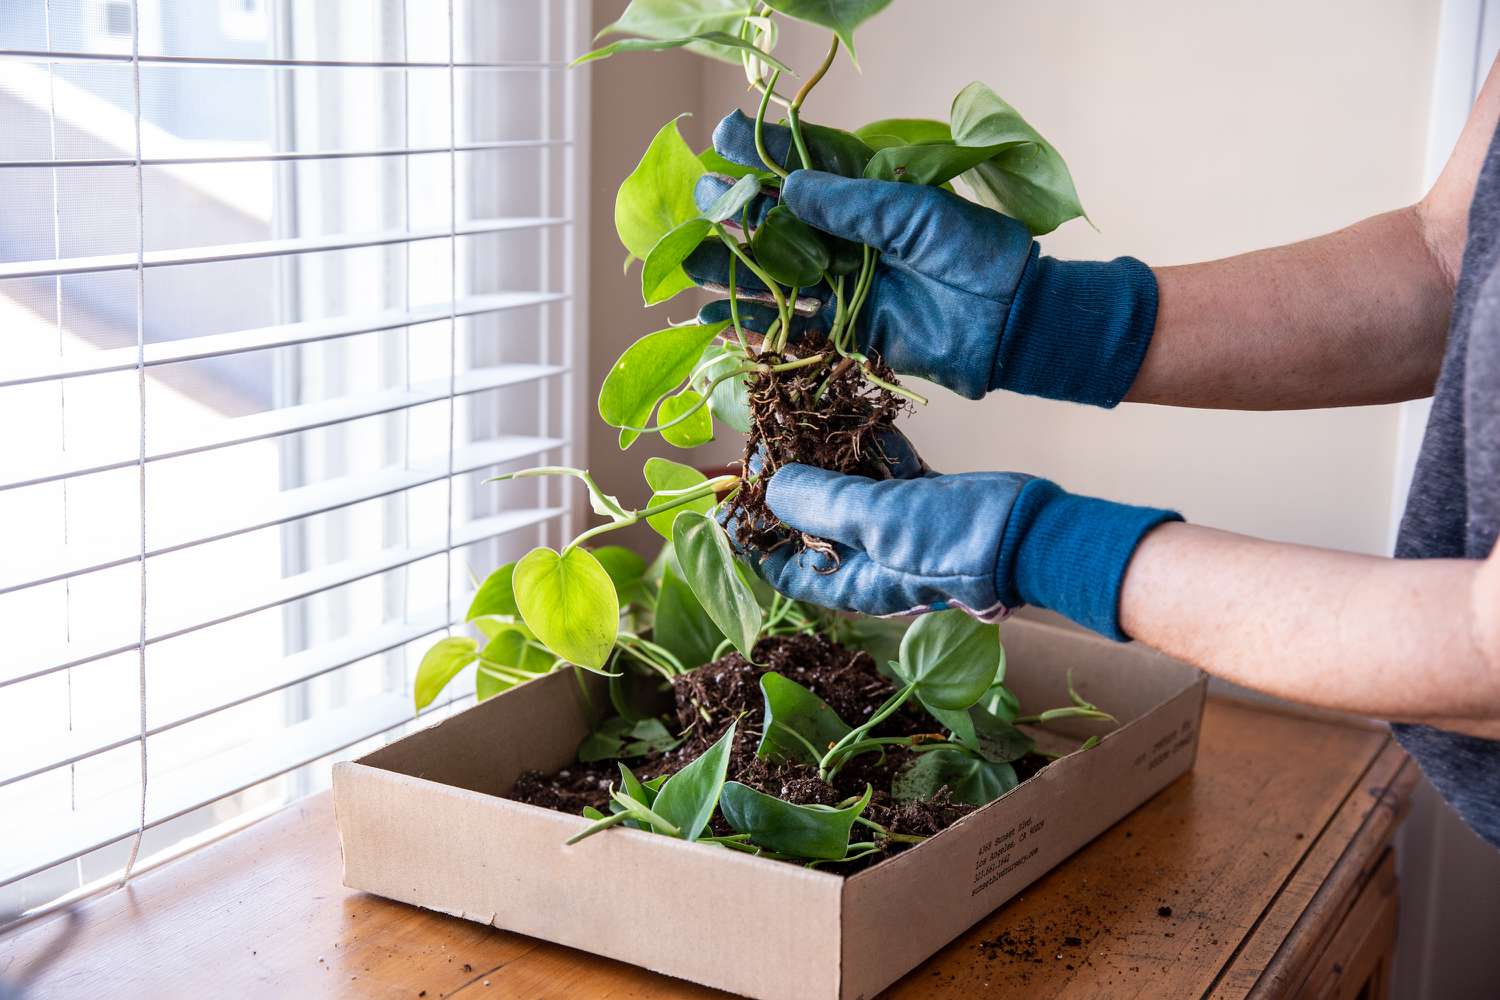 Pothos plant roots cleaned from soil in box tray